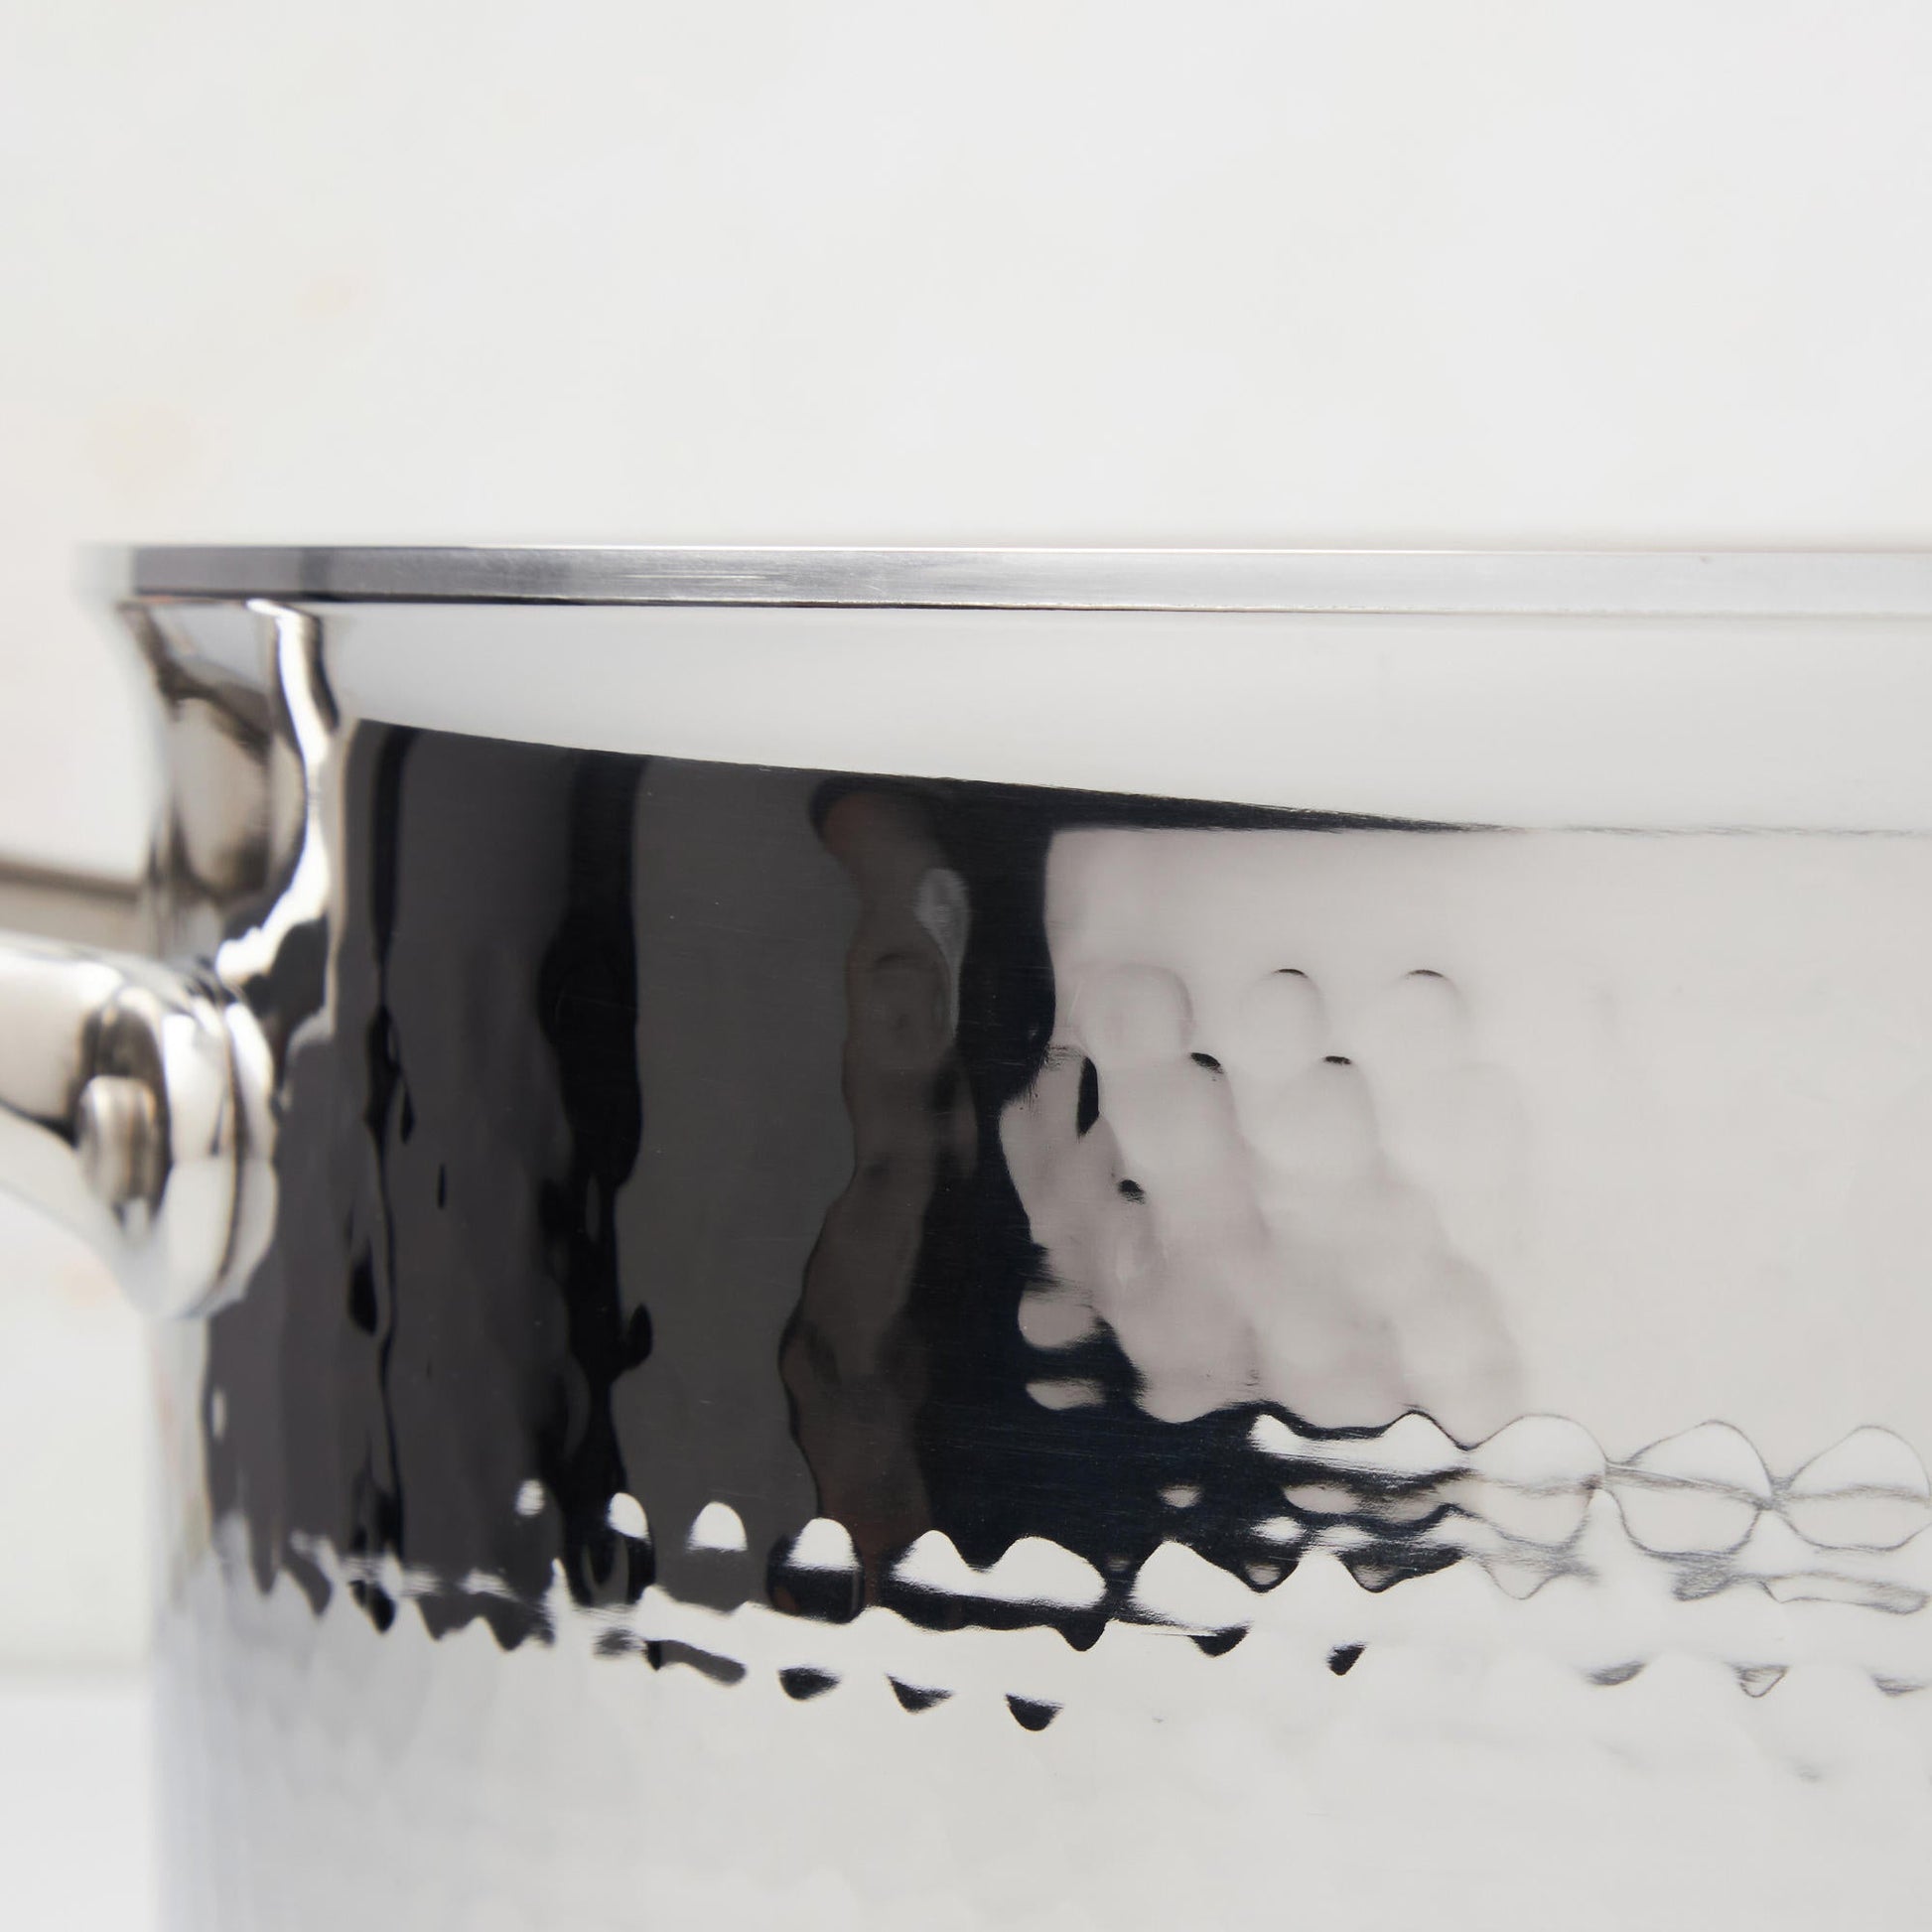 Hammering increases strength and beauty of clad stainless steel braiser from Ruffoni